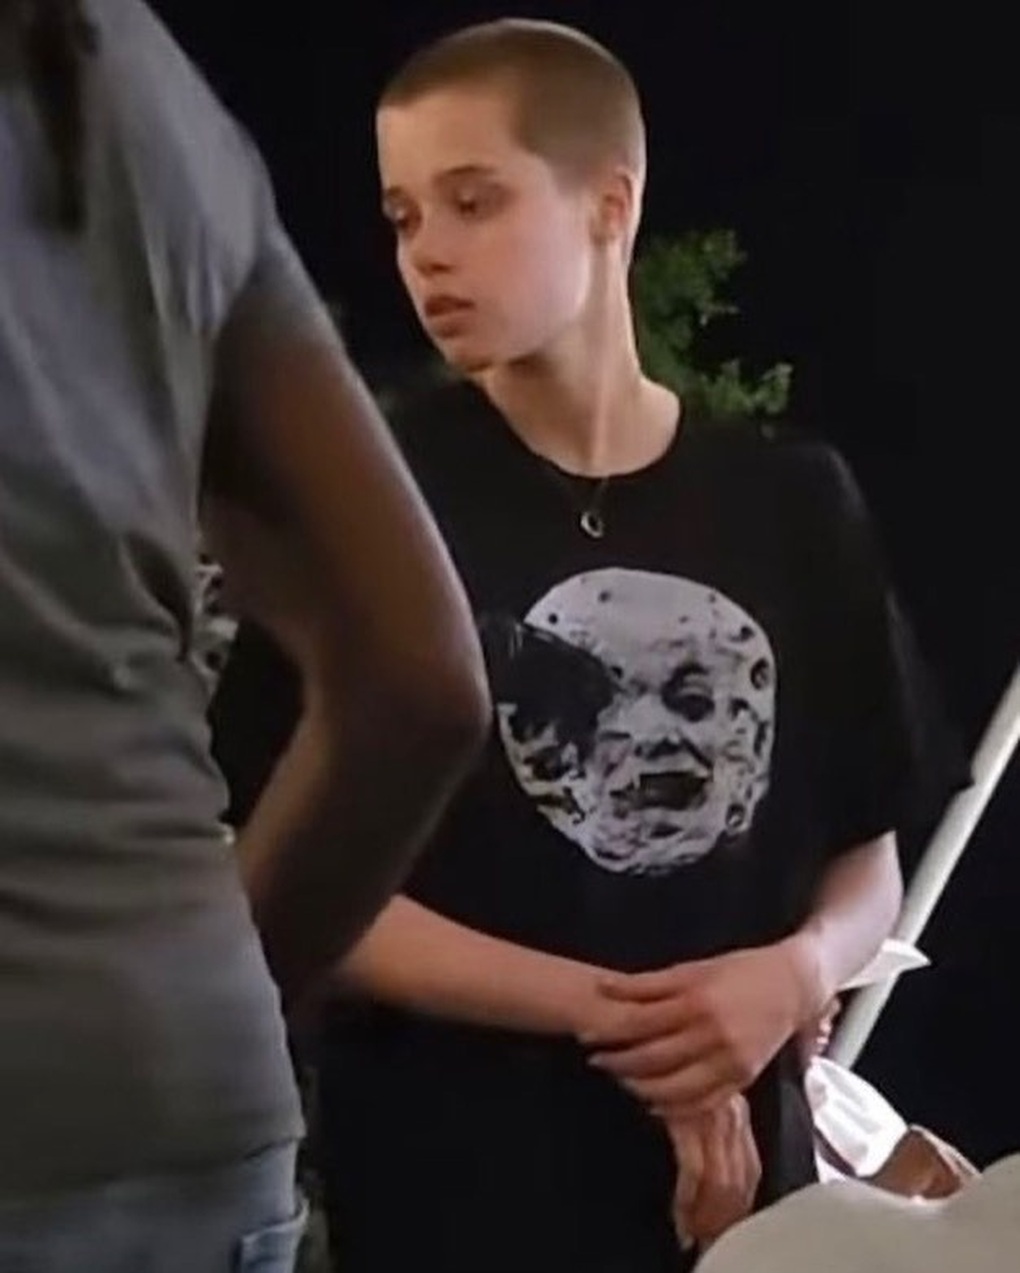 Shiloh Jolie-Pitt at age 17: Shaved her head for a special reason, life is curious - 1